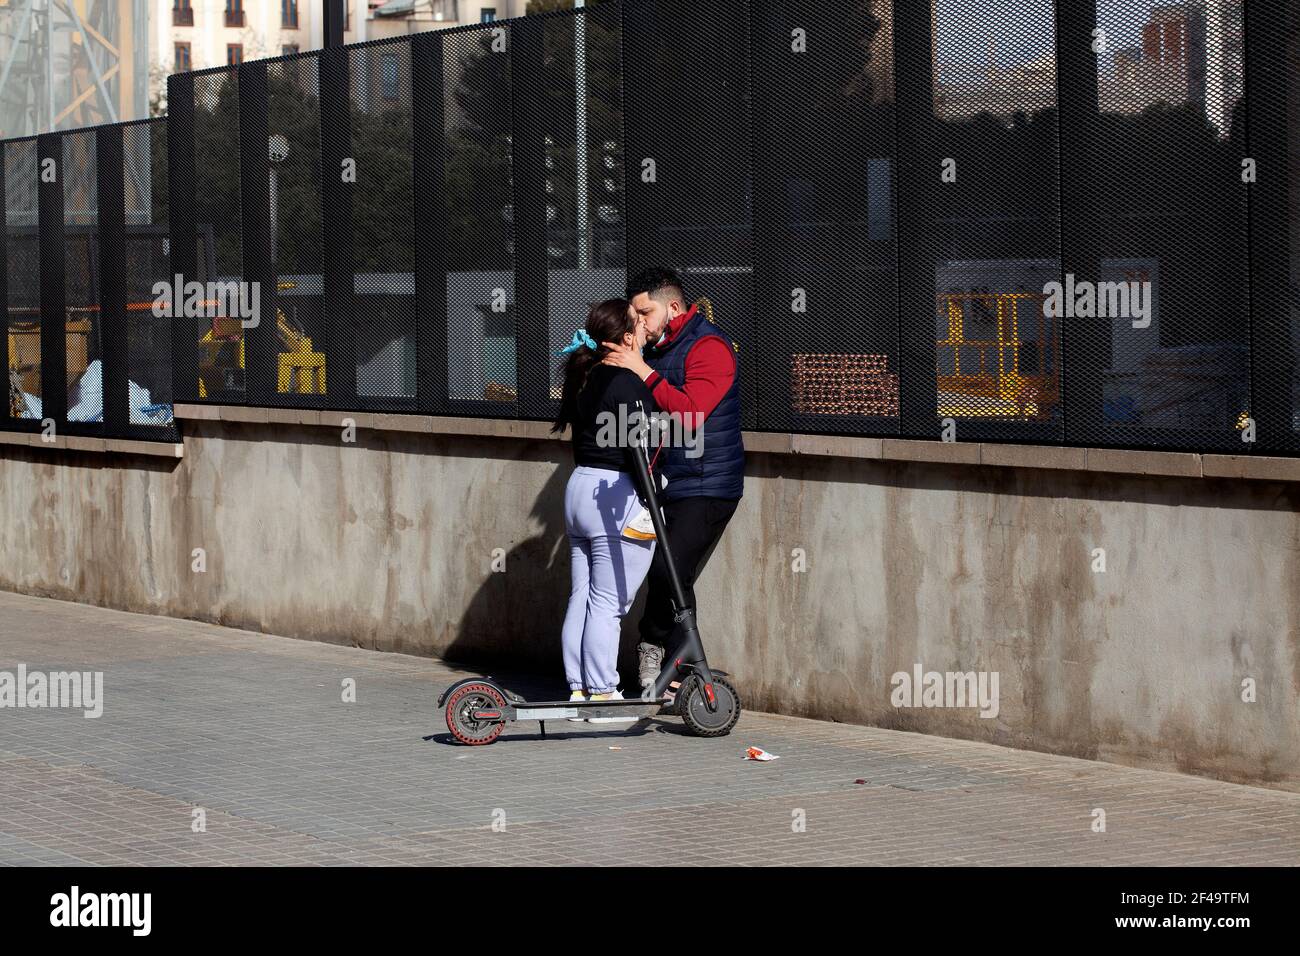 Couple kissing in the street, Barcelona, Spain. Stock Photo